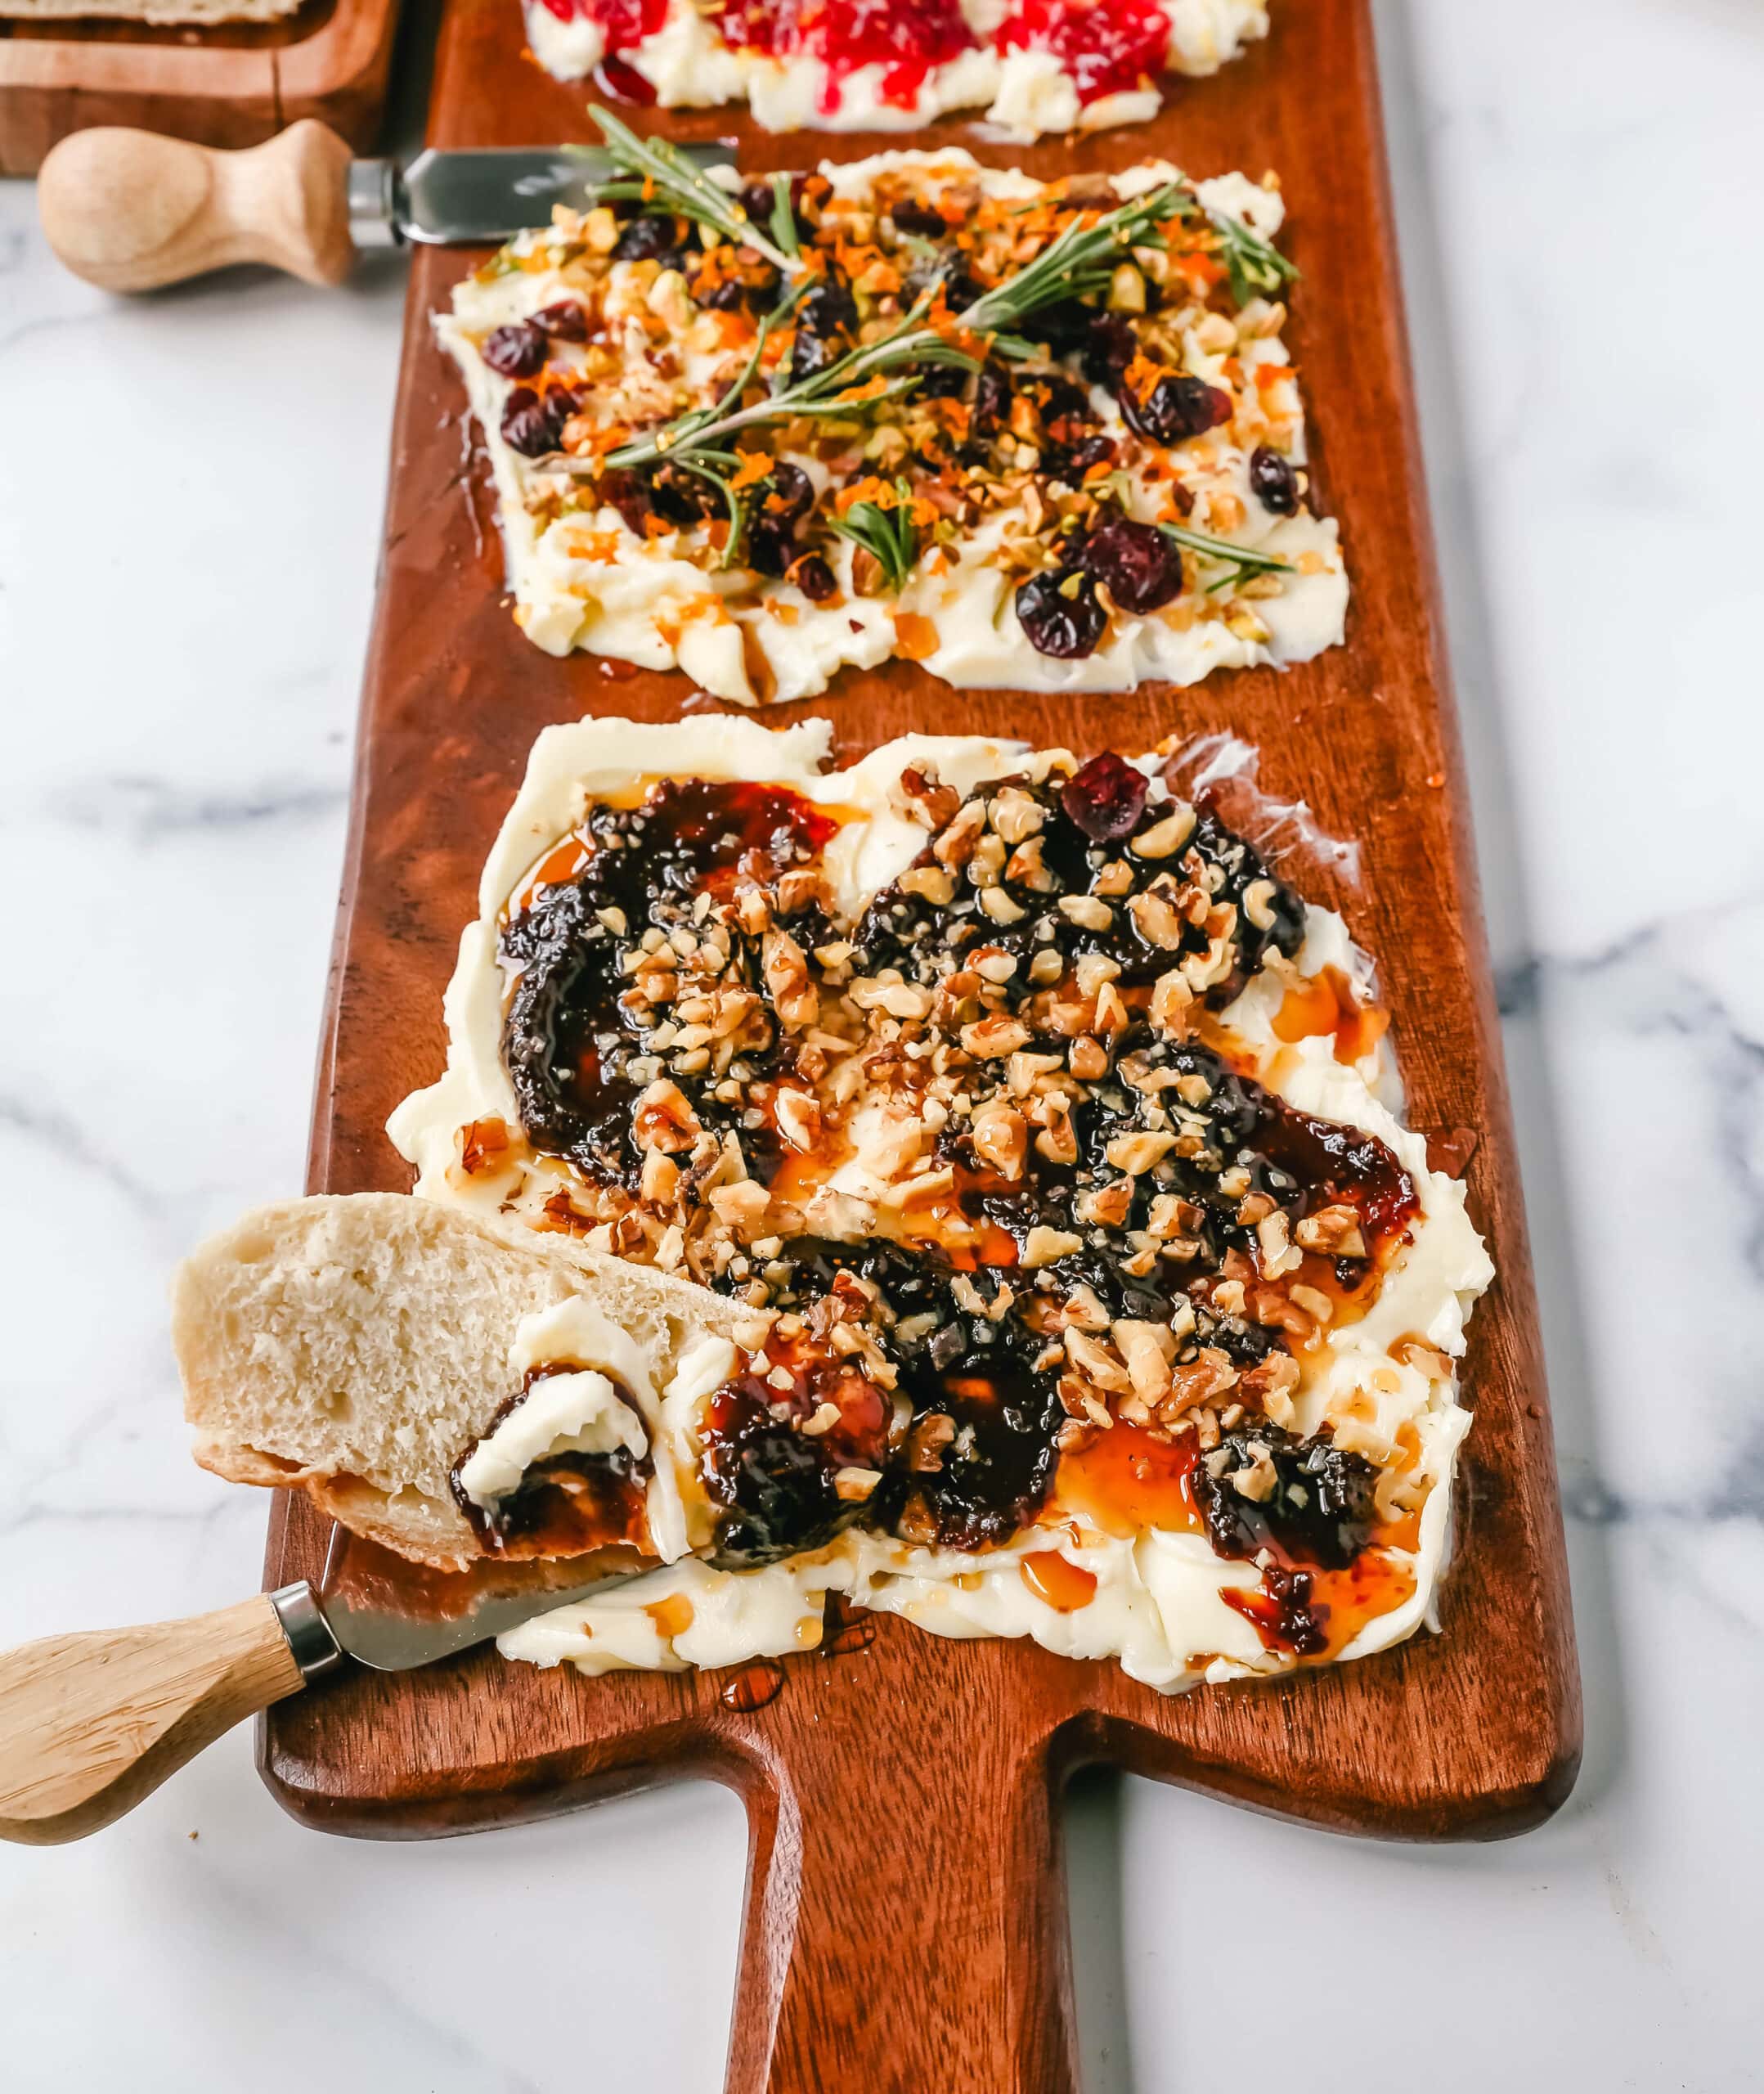  A Butter Board with fresh butter is spread onto a board and topped with an assortment of toppings and served with warm bread. This Butter Board with Toppings is such a fun appetizer for a party!